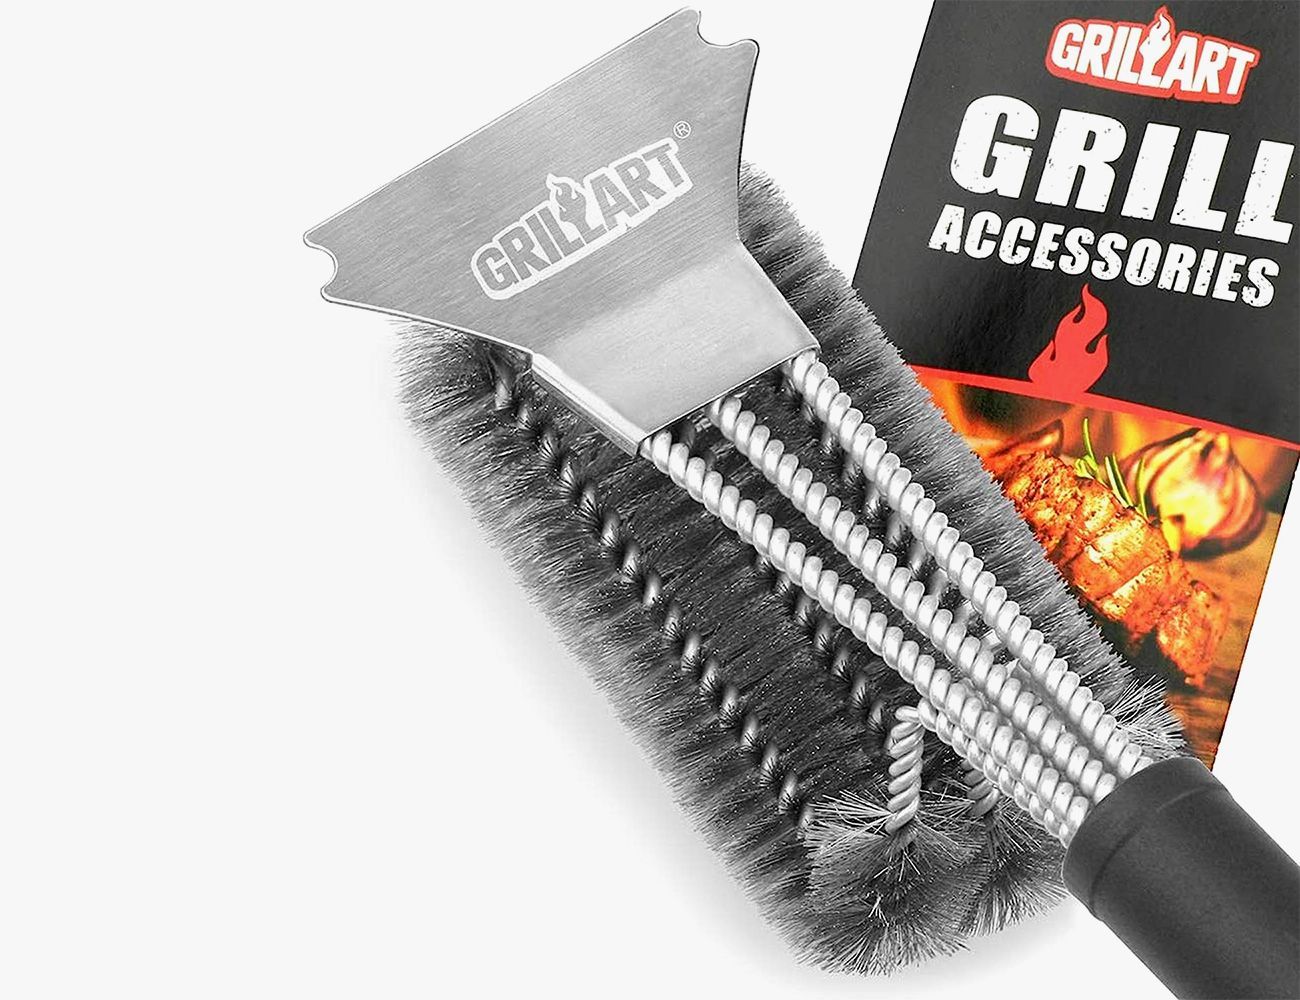 NEW ARRIVAL. GRILLART Grill Brush Bristle Free Steam Cleaning